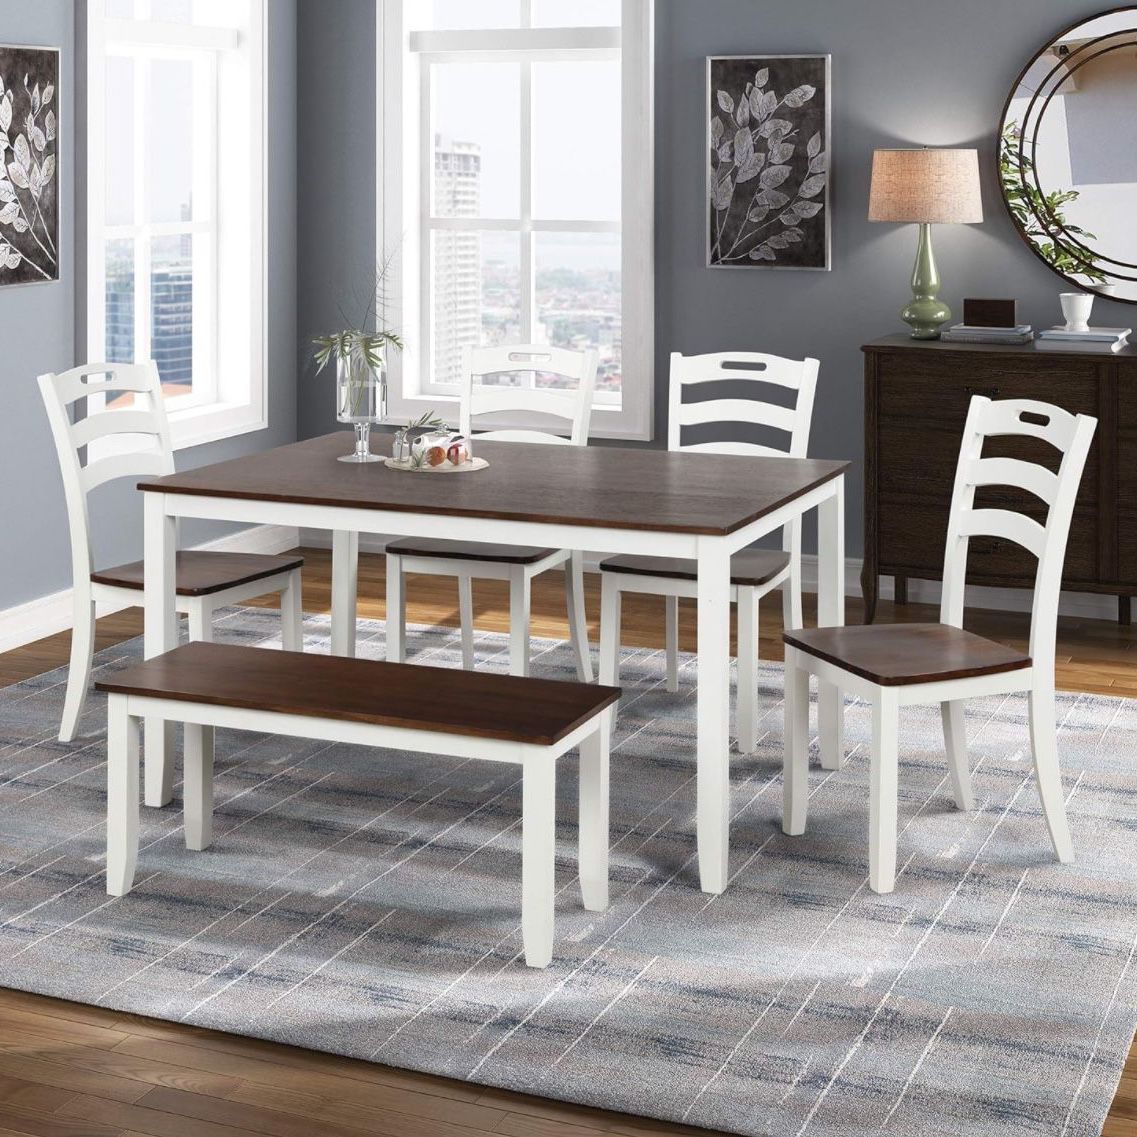 Set Of 6 Wood Dining Dinette Table and 4 Chairs with 1 Bench (Ivory and Cherry) [NEW]